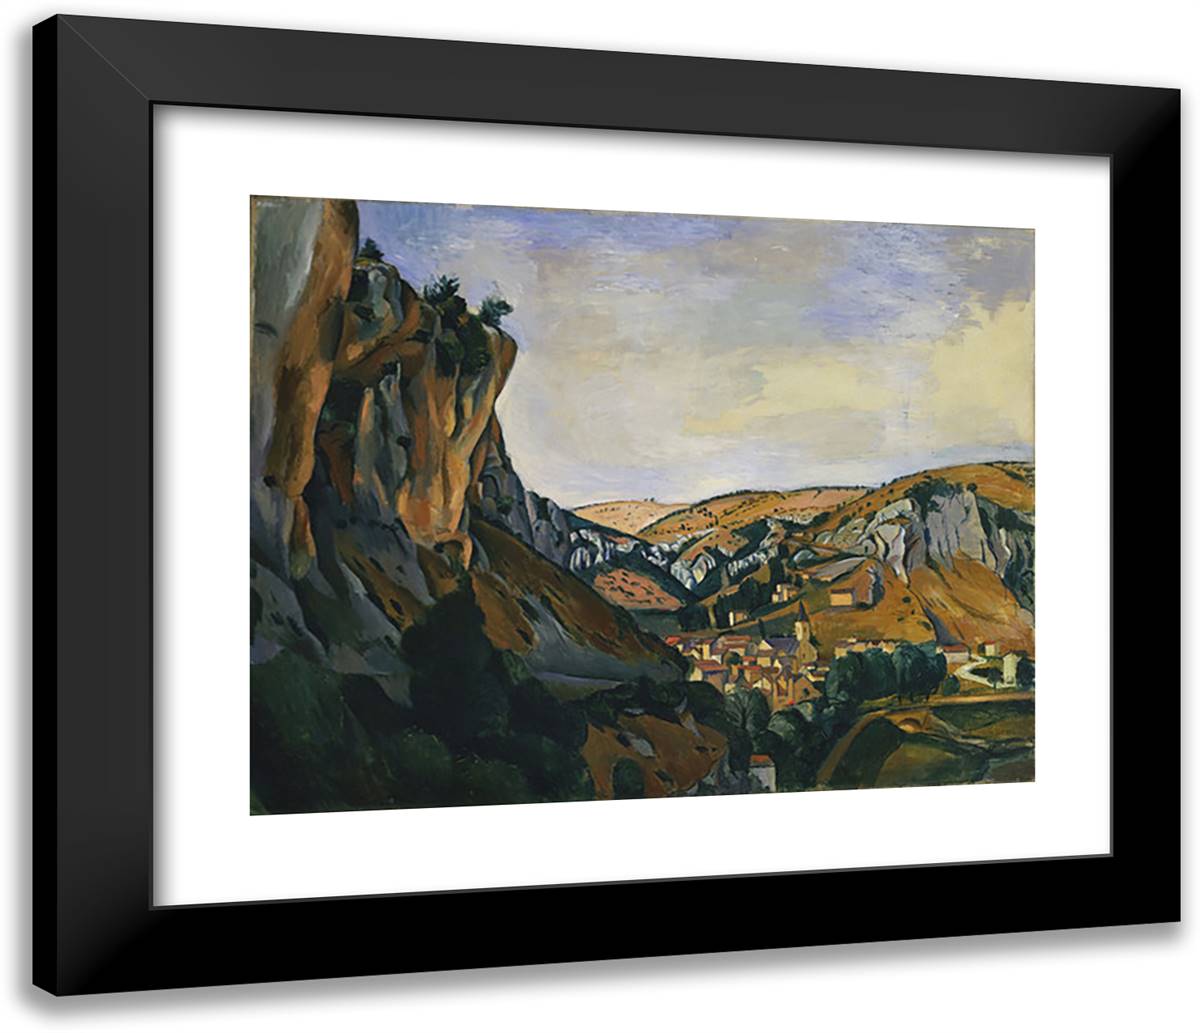 Valley of the Lot at Vers  23x20 Black Modern Wood Framed Art Print Poster by Derain, Andre